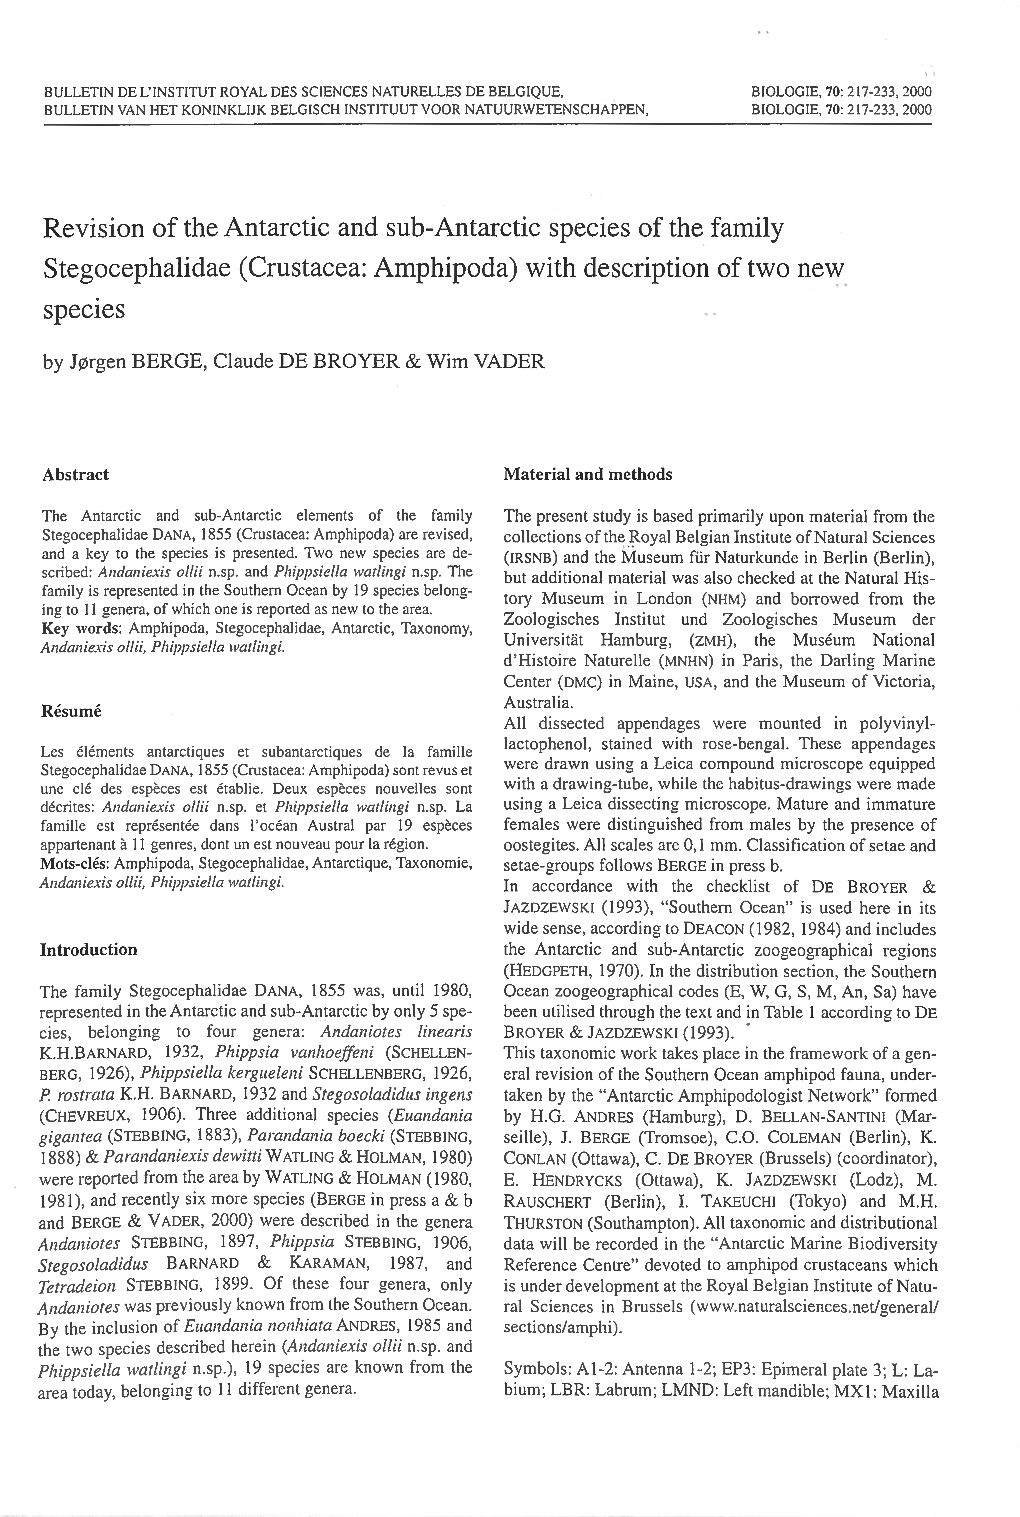 Crustacea: Amphipoda) with Description of Two New